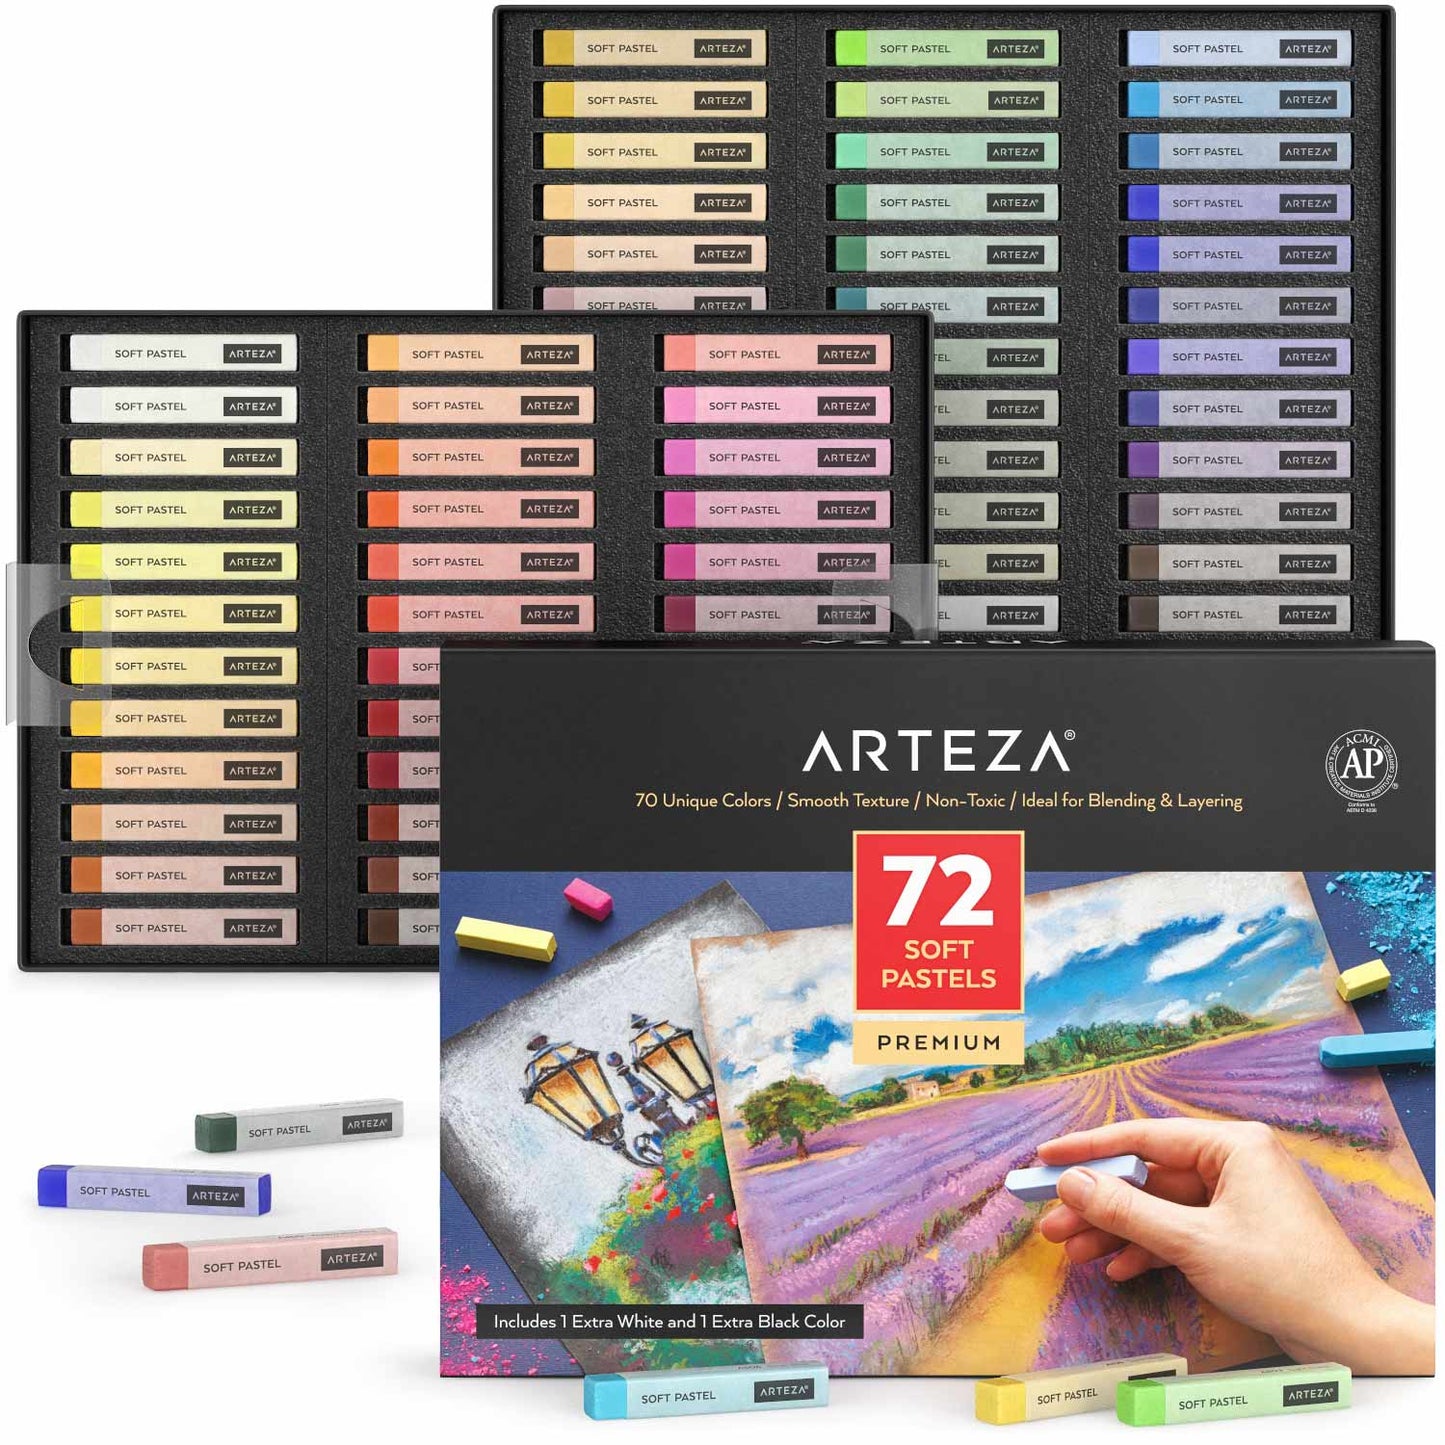 NEW Soft Pastels -Mungyo Gallery- Artists' Set of 12 Assorted